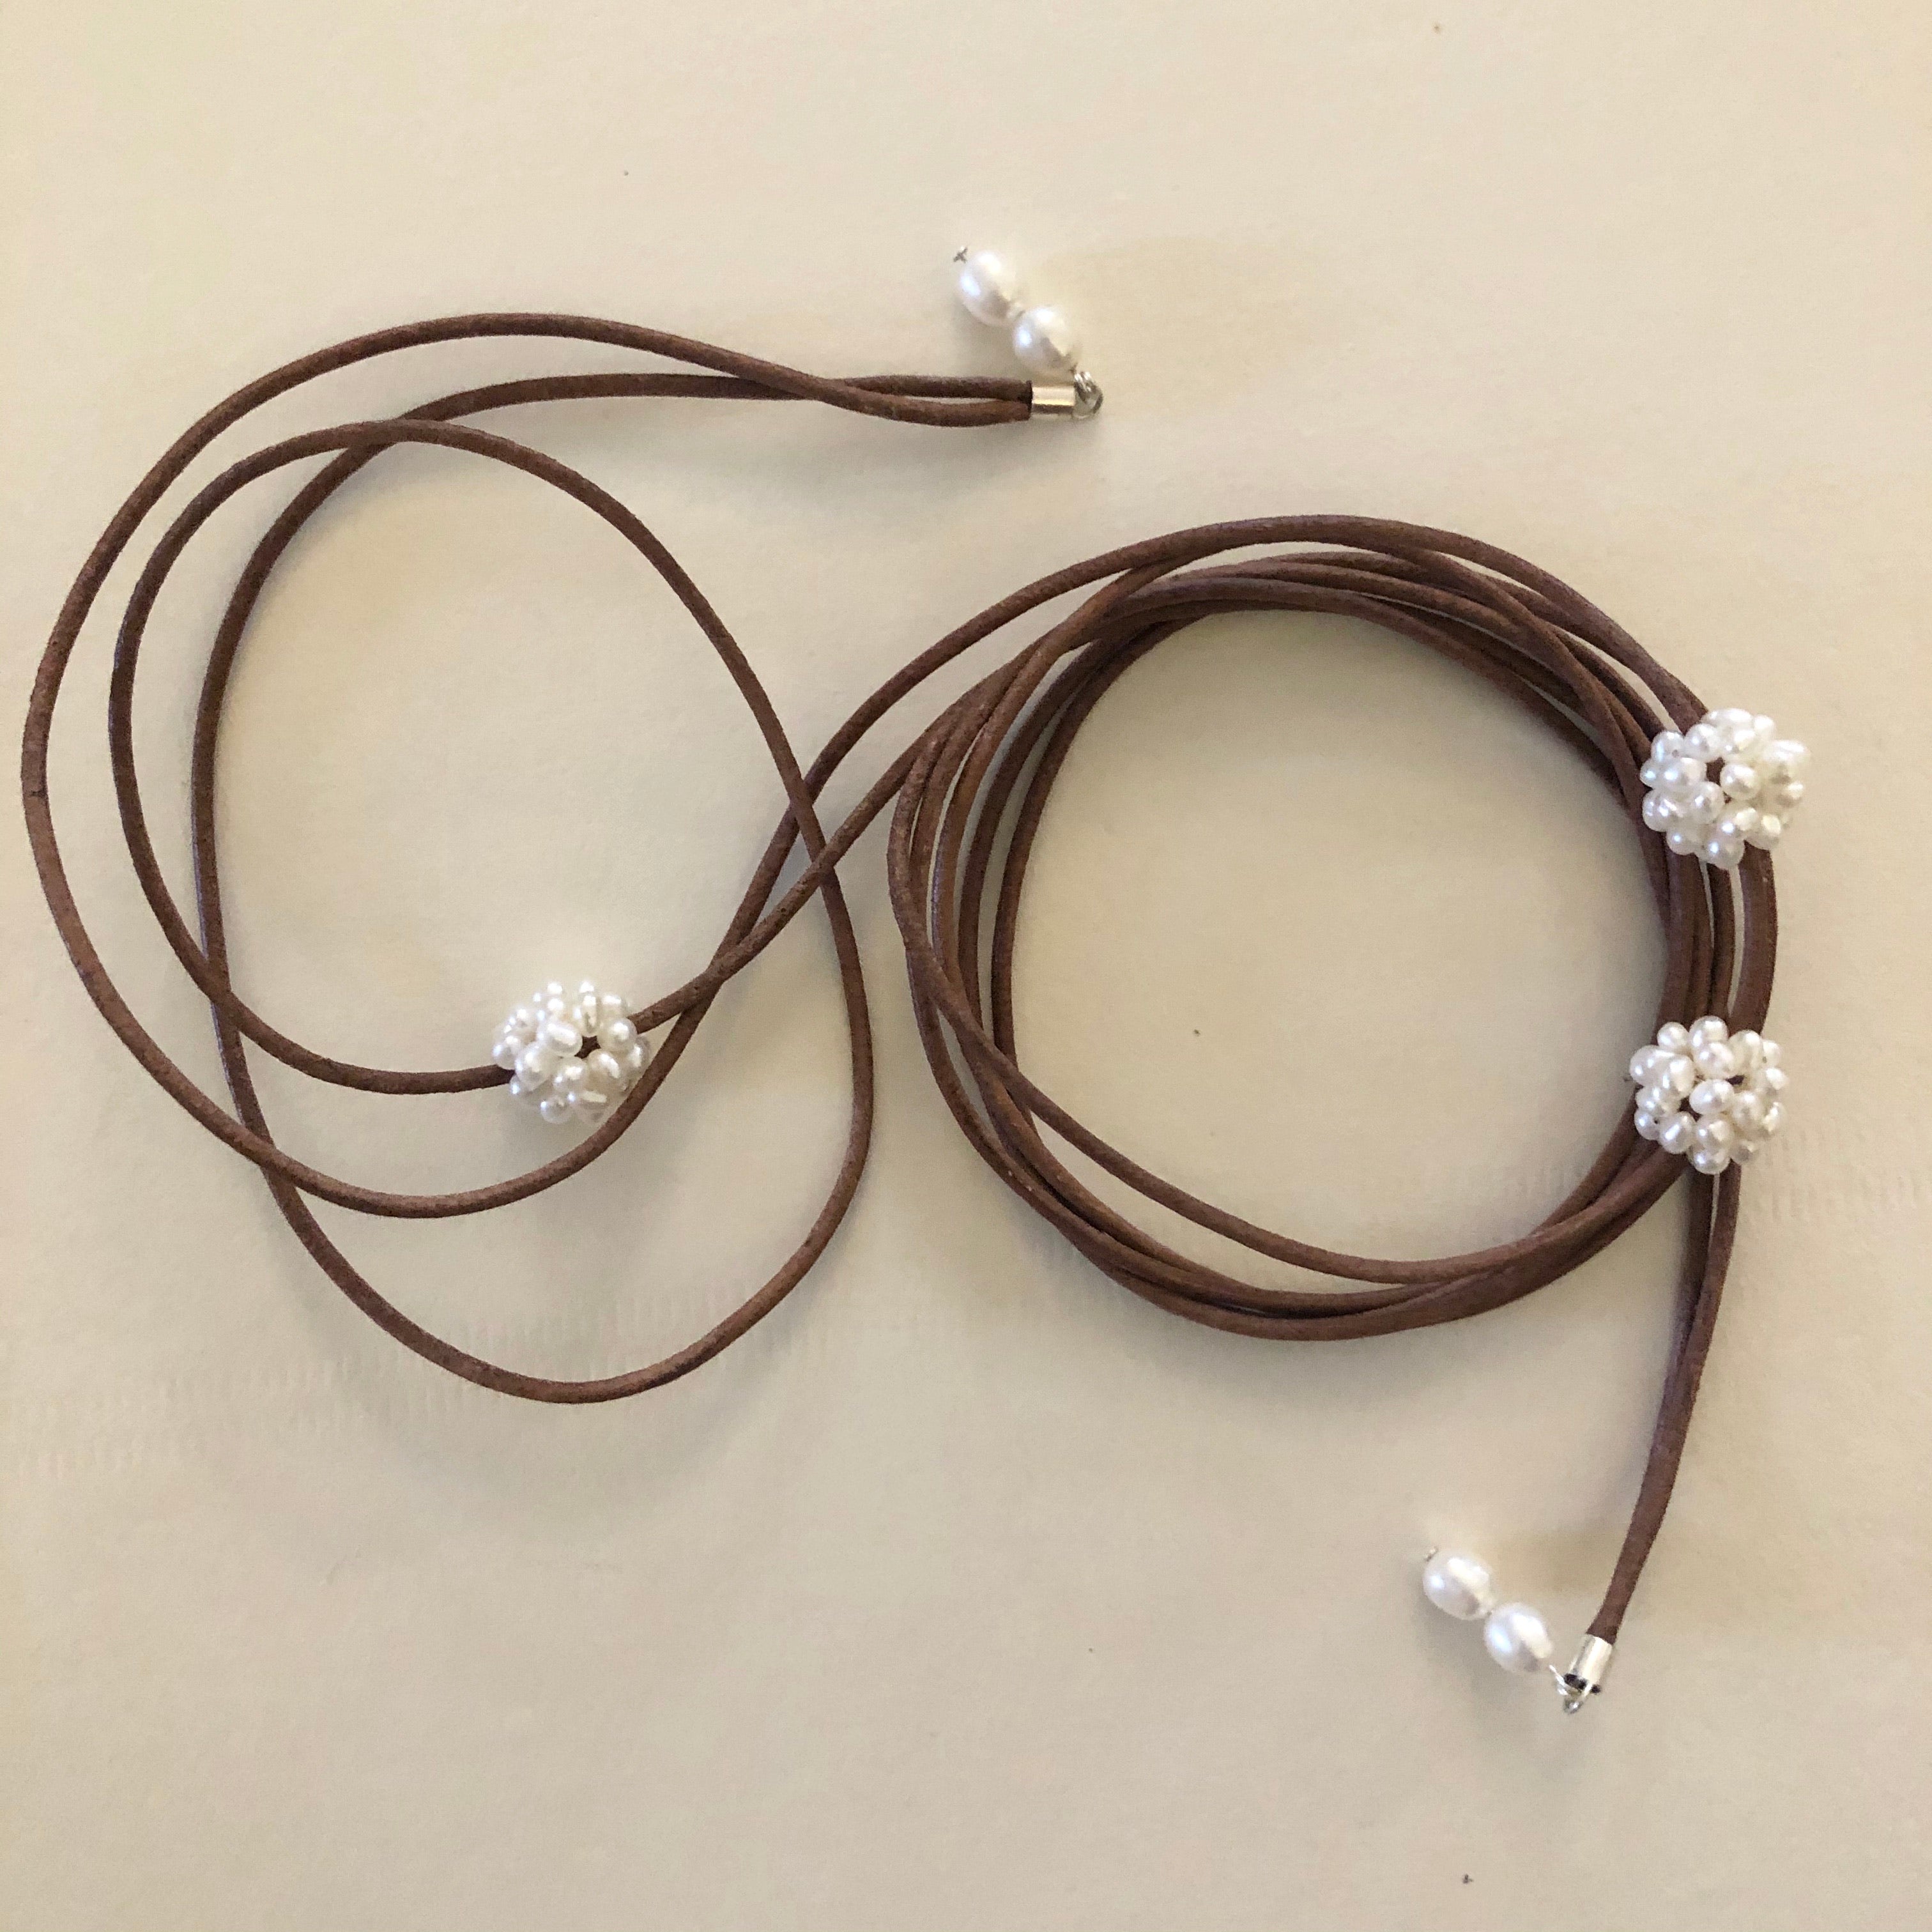 NATURAL LEATHER DOUBLE STRAND NECKLACE